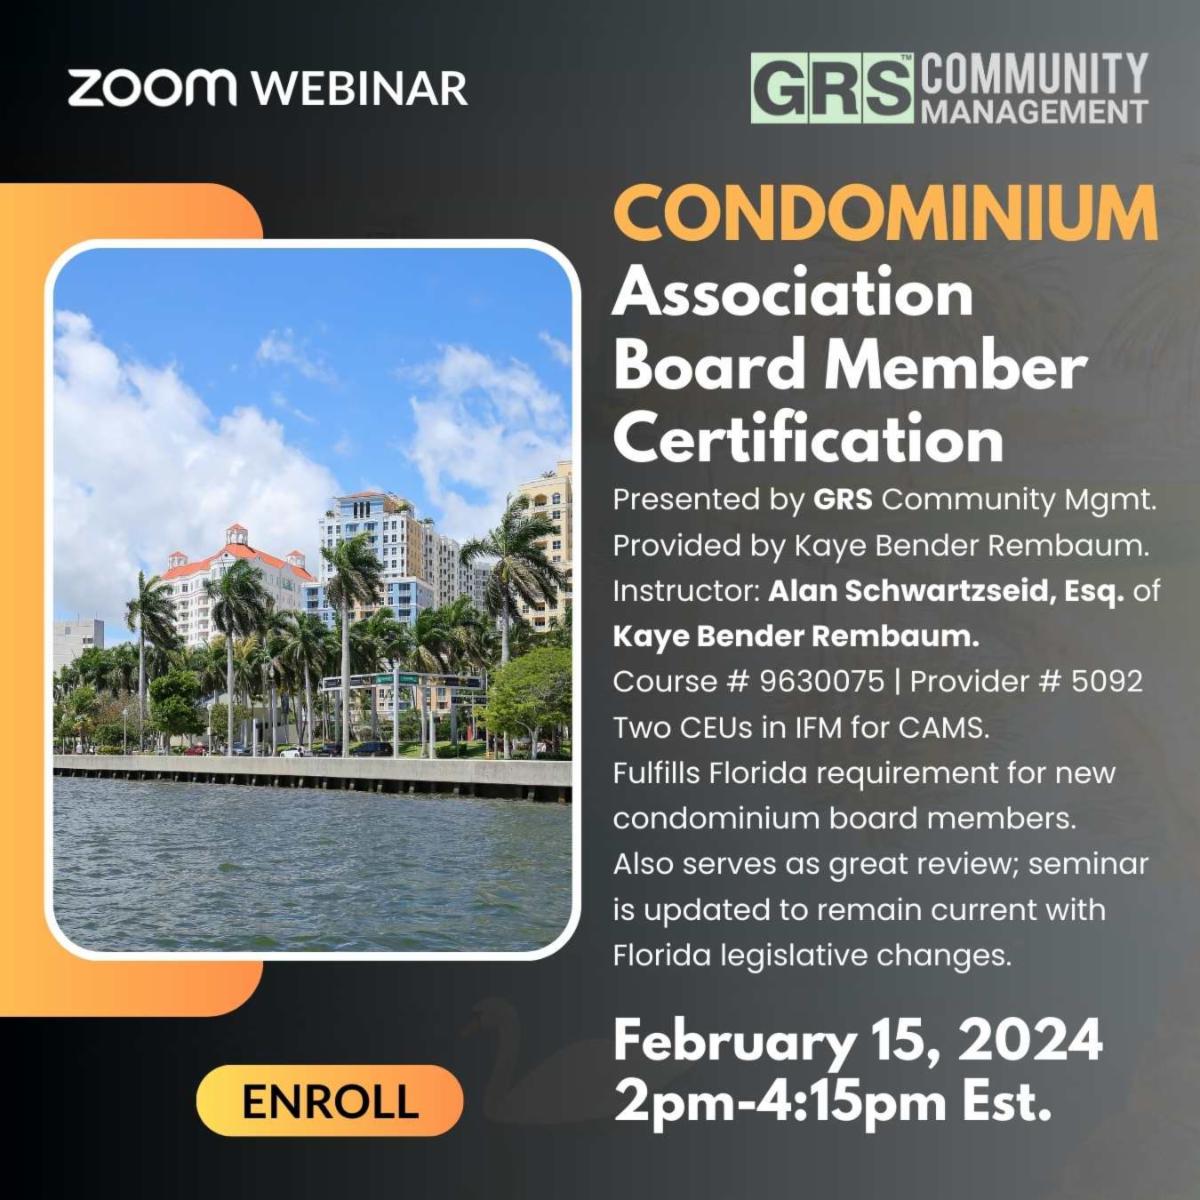 Condo Board Member Cert (Thurs.) Feb. 15th Hosted by GRS Community Management. Course provided by Kaye Bender Rembaum.